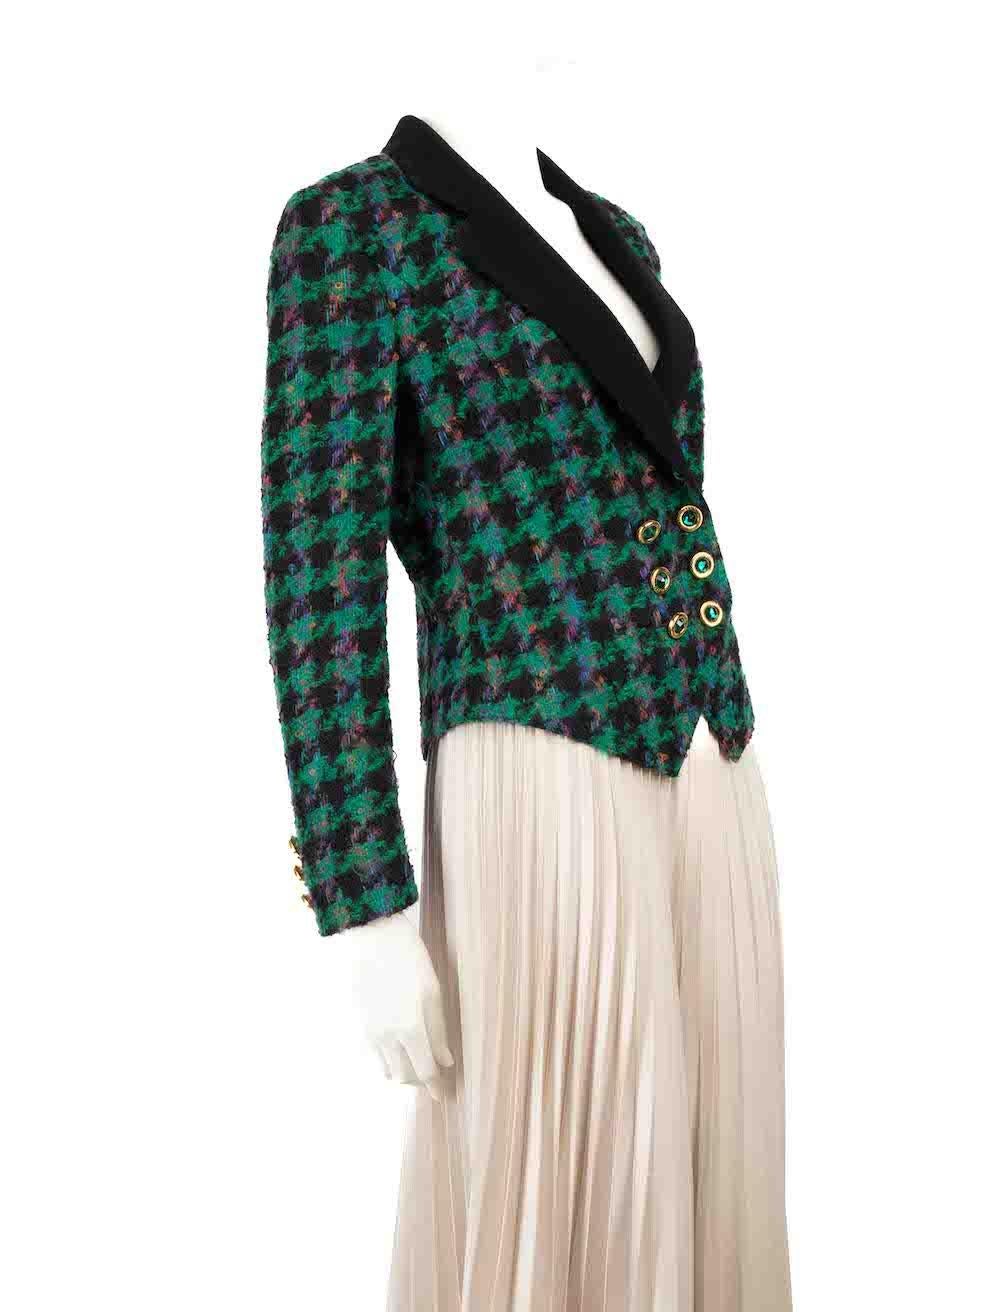 CONDITION is Very good. Minimal wear to blazer is evident. Minimal wear to both sleeves with plucks and pilling to the weave on this used Louis Fèraud designer resale item.
 
 
 
 Details
 
 
 Green
 
 Mohair
 
 Blazer
 
 Tartan pattern
 
 Double